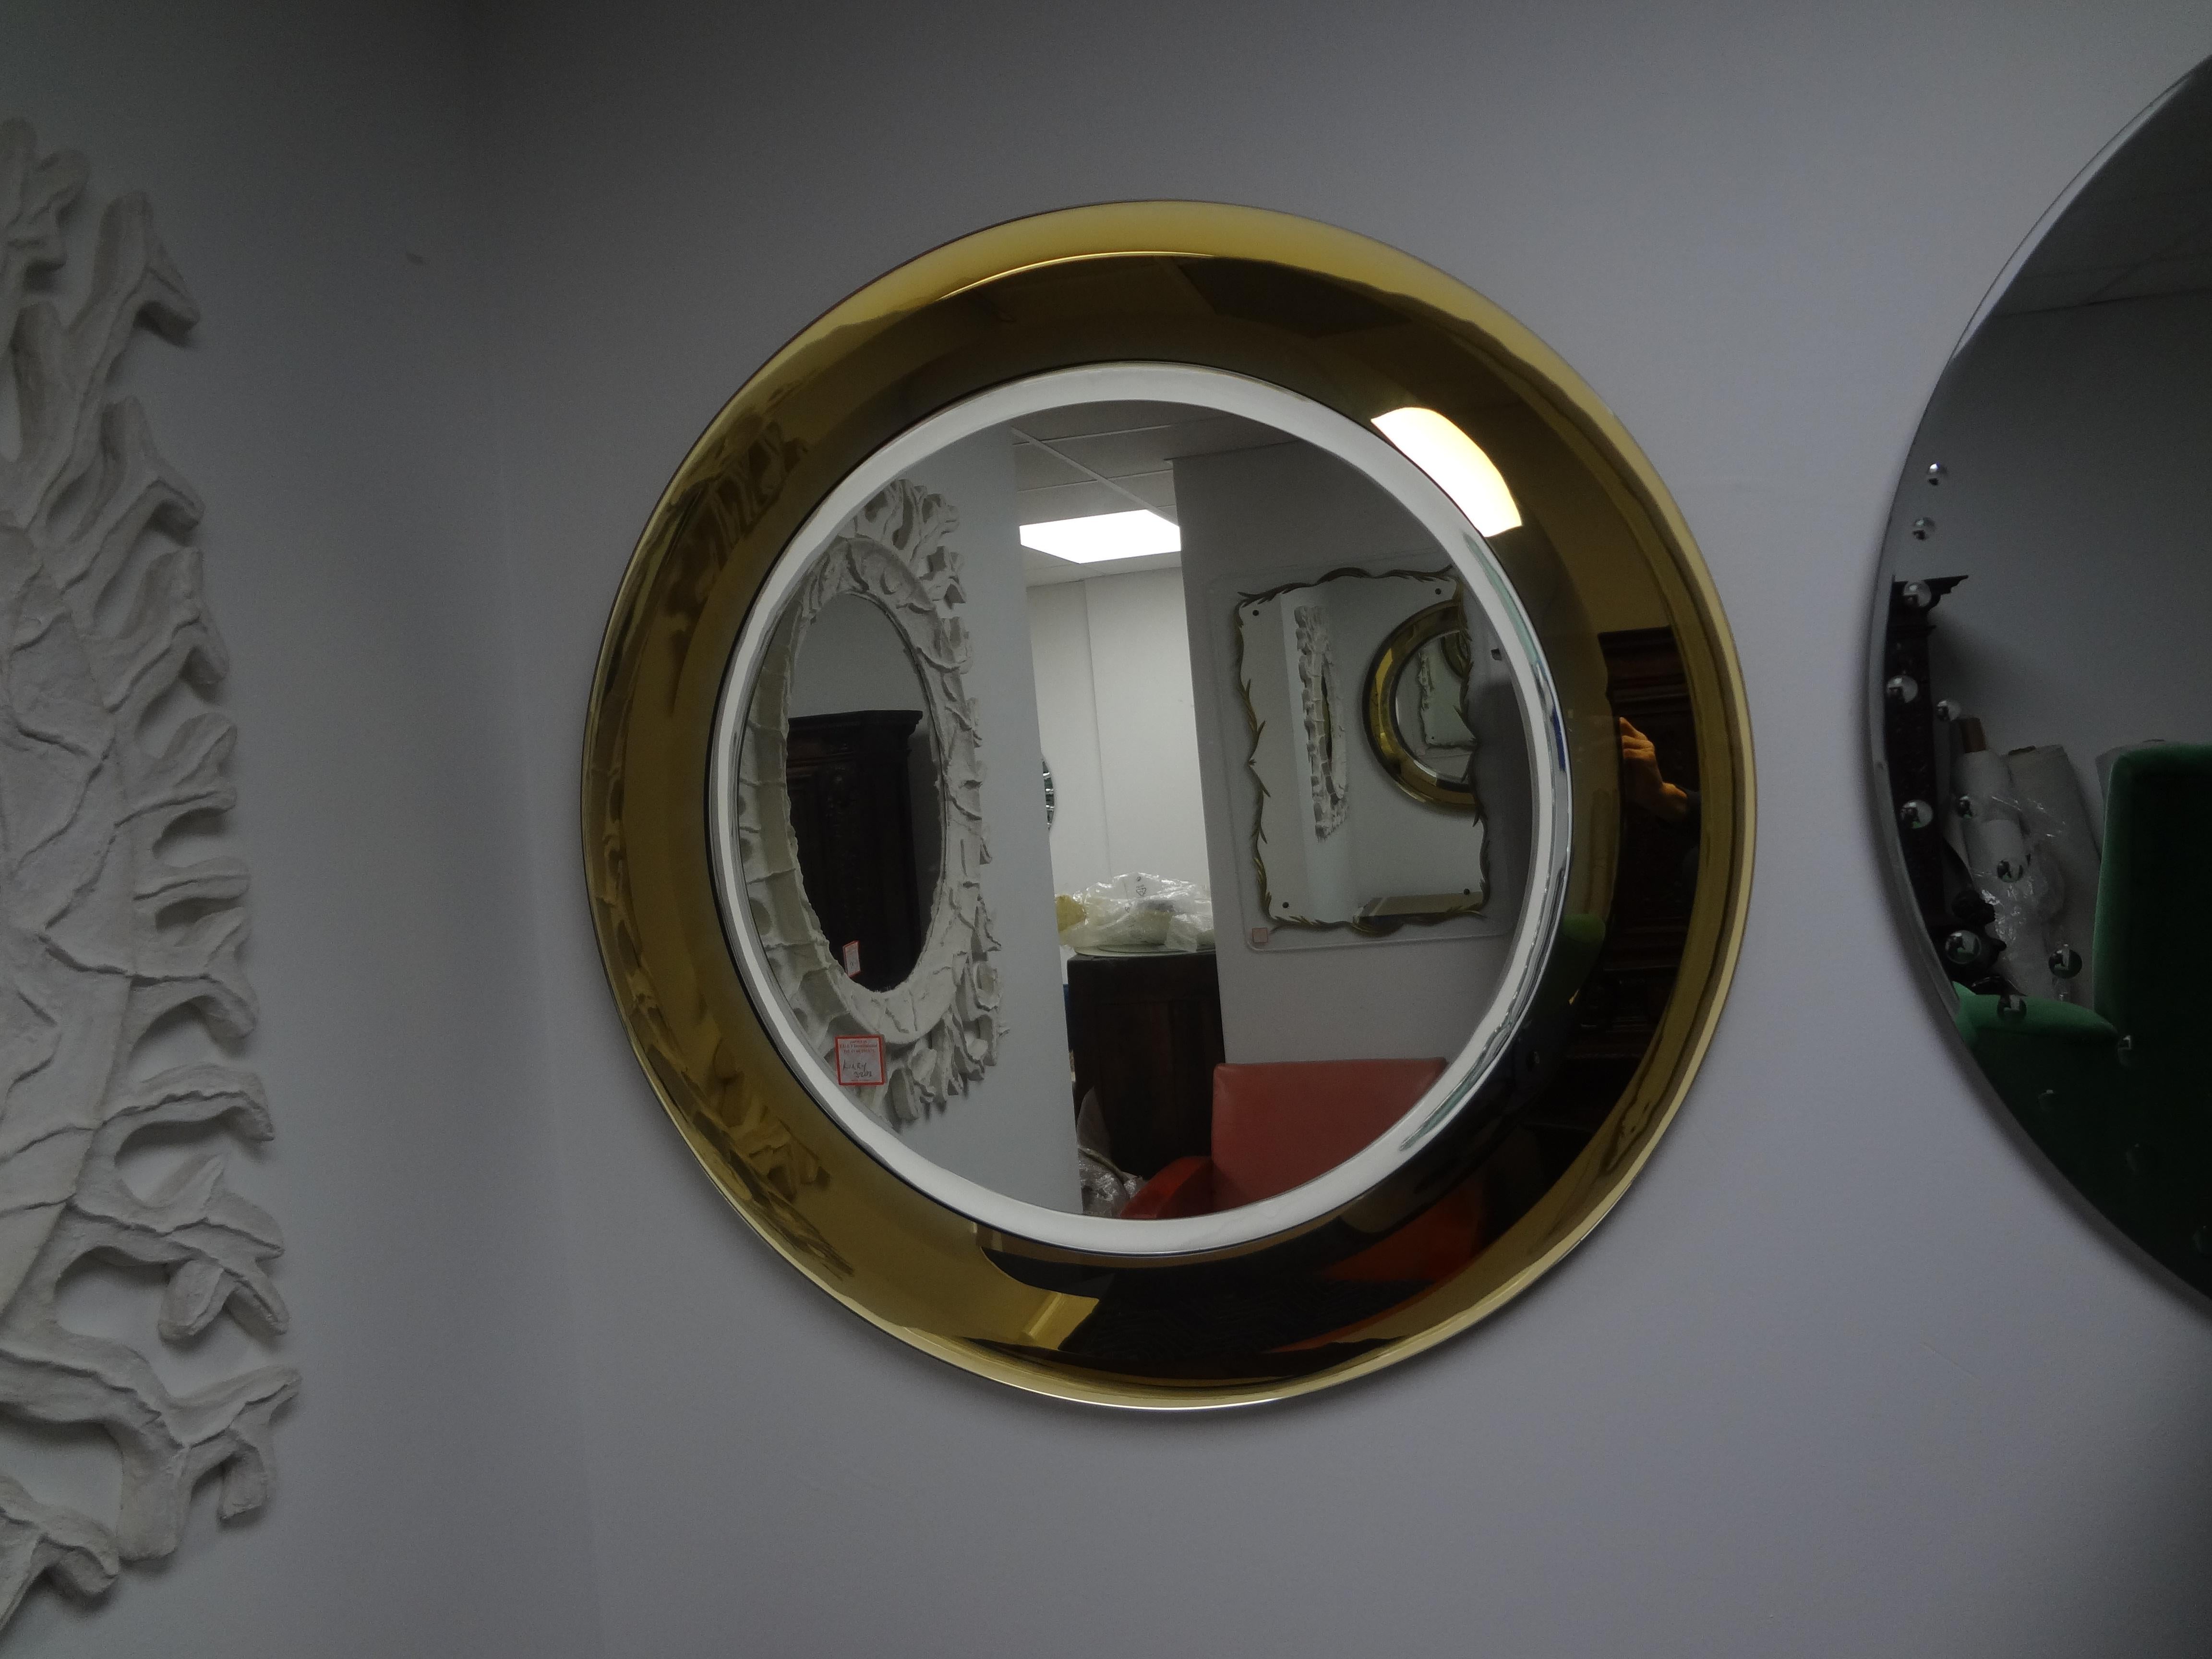 Pair Of Italian Fontana Arte Attributed Beveled Mirrors.
Hard to find pair of gold Italian  Max Ingrand for Fontana Arte attributed mirrors with three exterior gold beveled bands surrounding a beveled silver central mirror.
These outstanding Italian